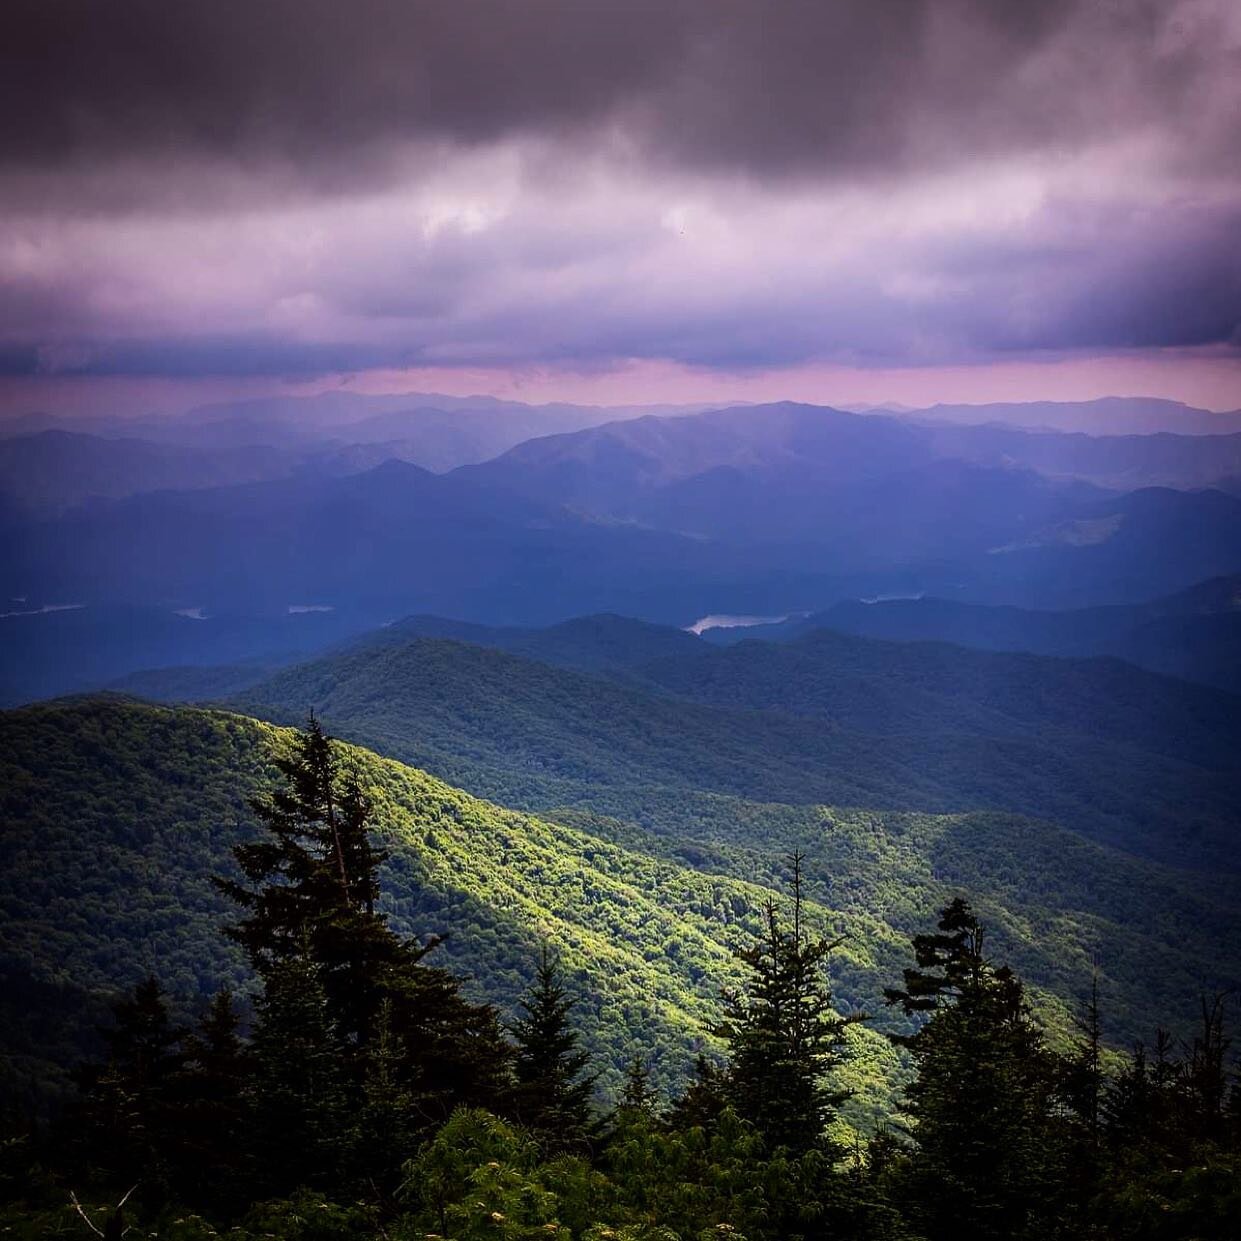 View from the Clingman&rsquo;s Dome area of the Great Smoky Mountains National Park.

#smokymountains #smokymountainsnationalpark #nationalpark #landscape #clingmansdome #greginda